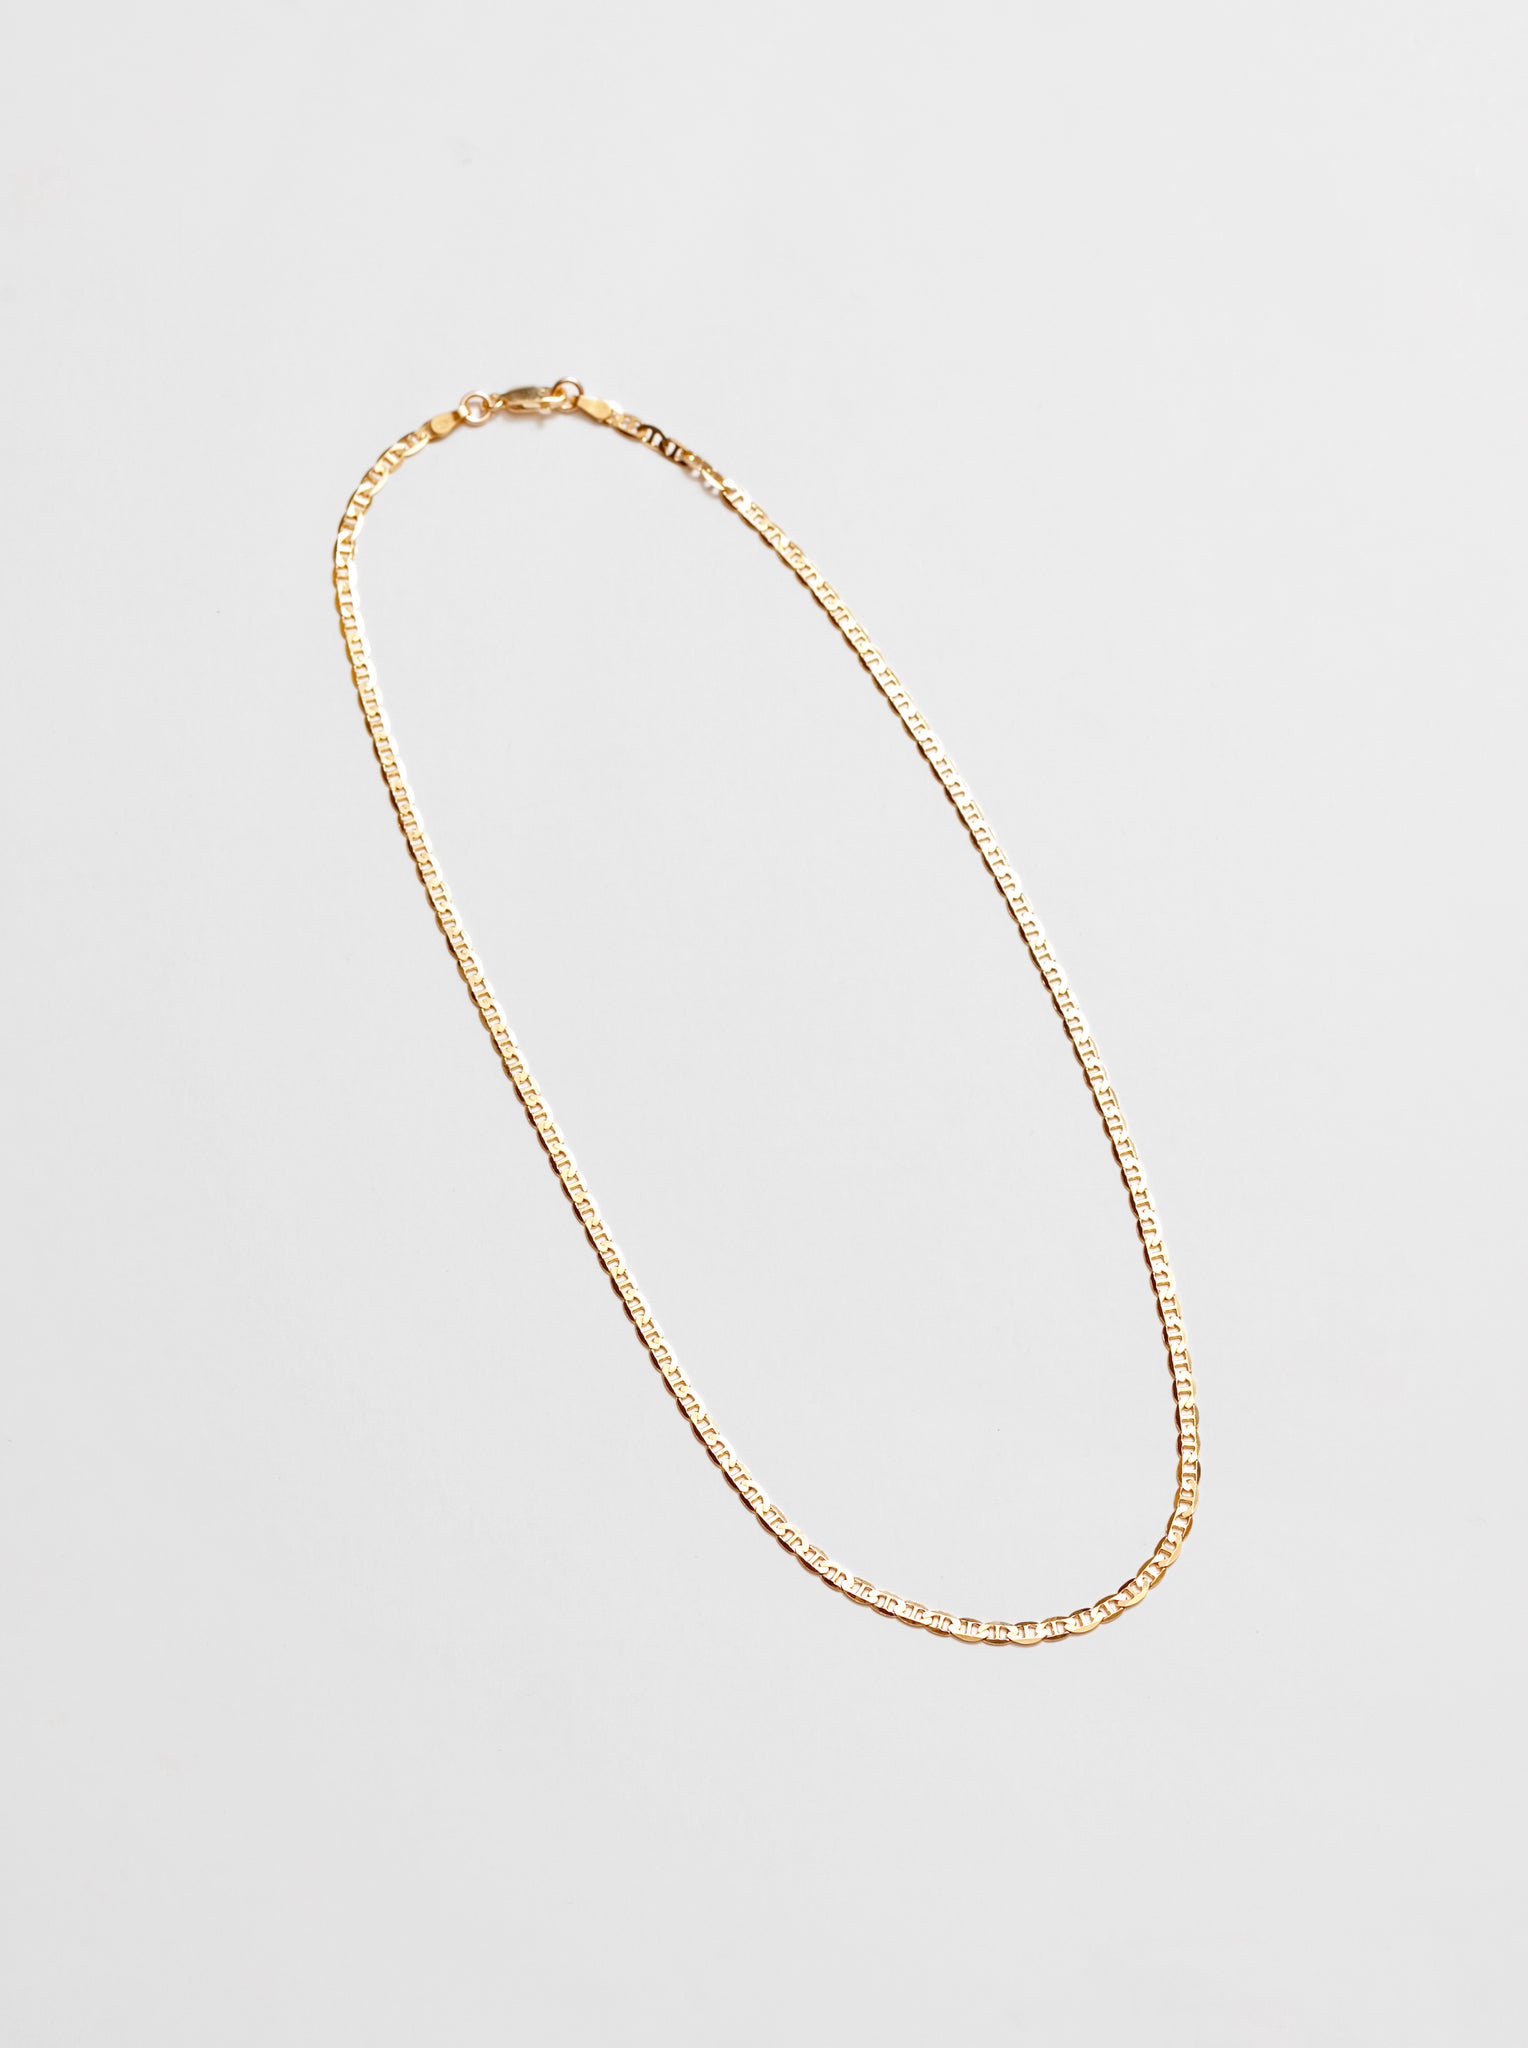 Wolf Circus-Wolf Circus 14k Gold Vermeil Mariner Chain Necklace | Handcrafted | Toni Necklace in Gold-